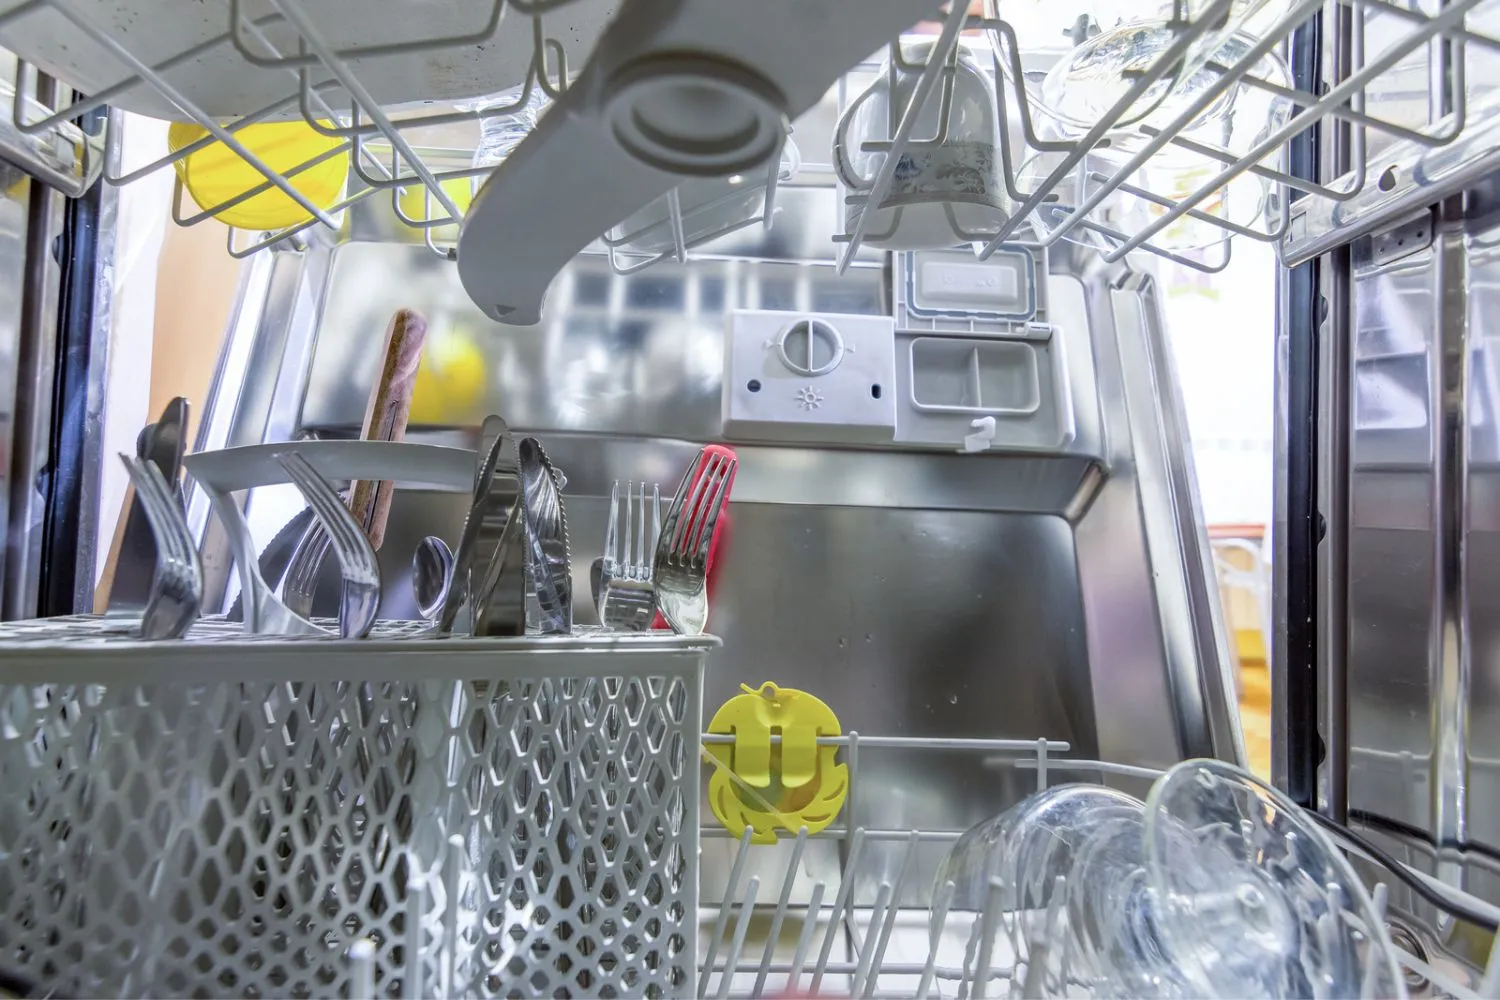 How To Clean A Dishwasher Without Vinegar ( 5 natural alternatives)